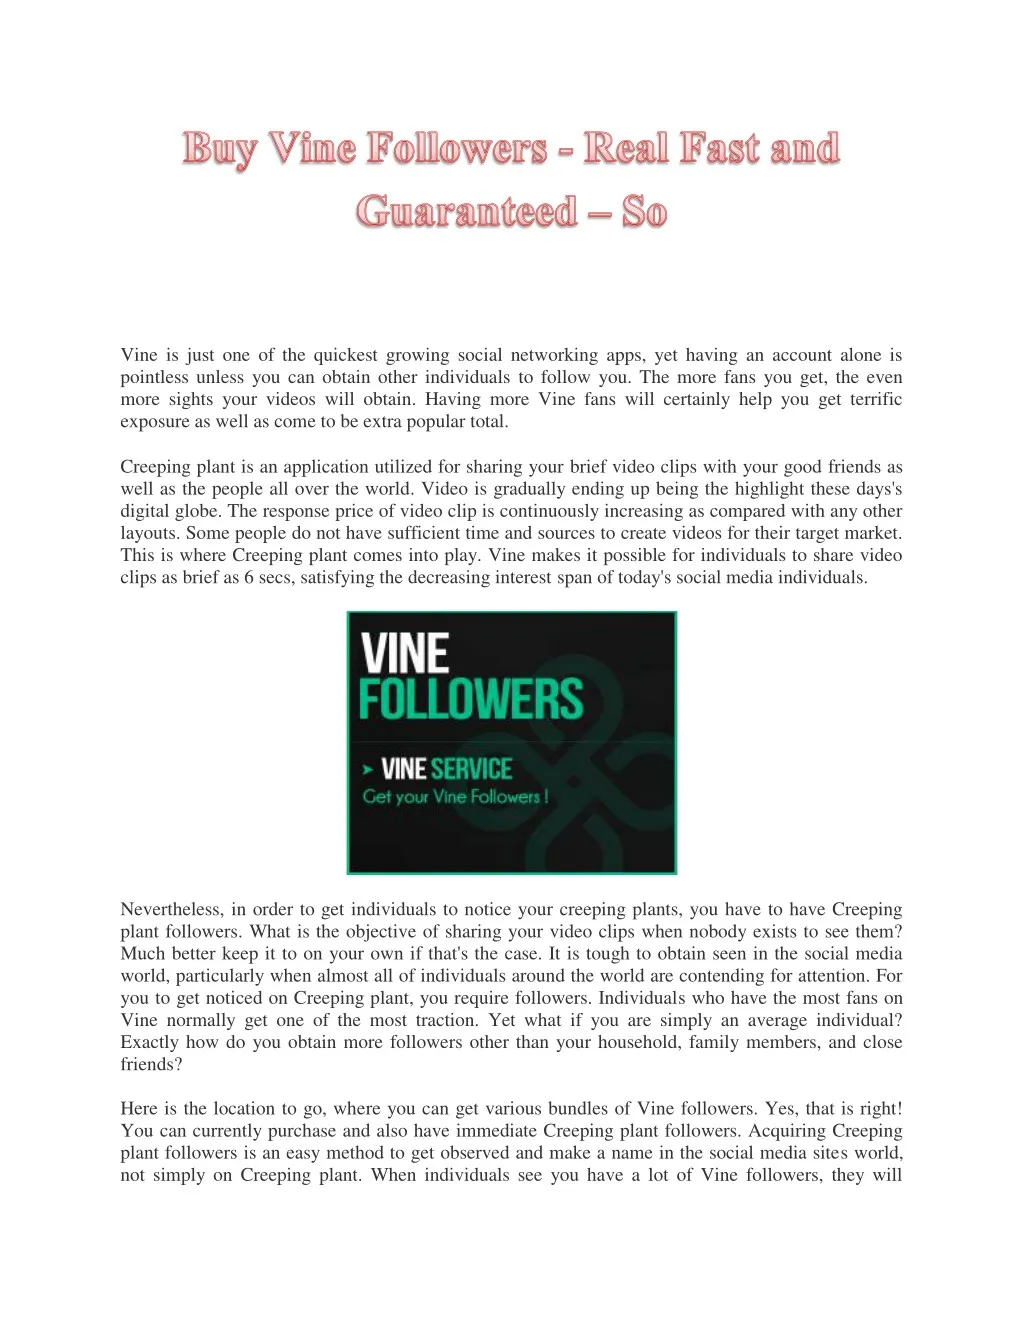 vine is just one of the quickest growing social